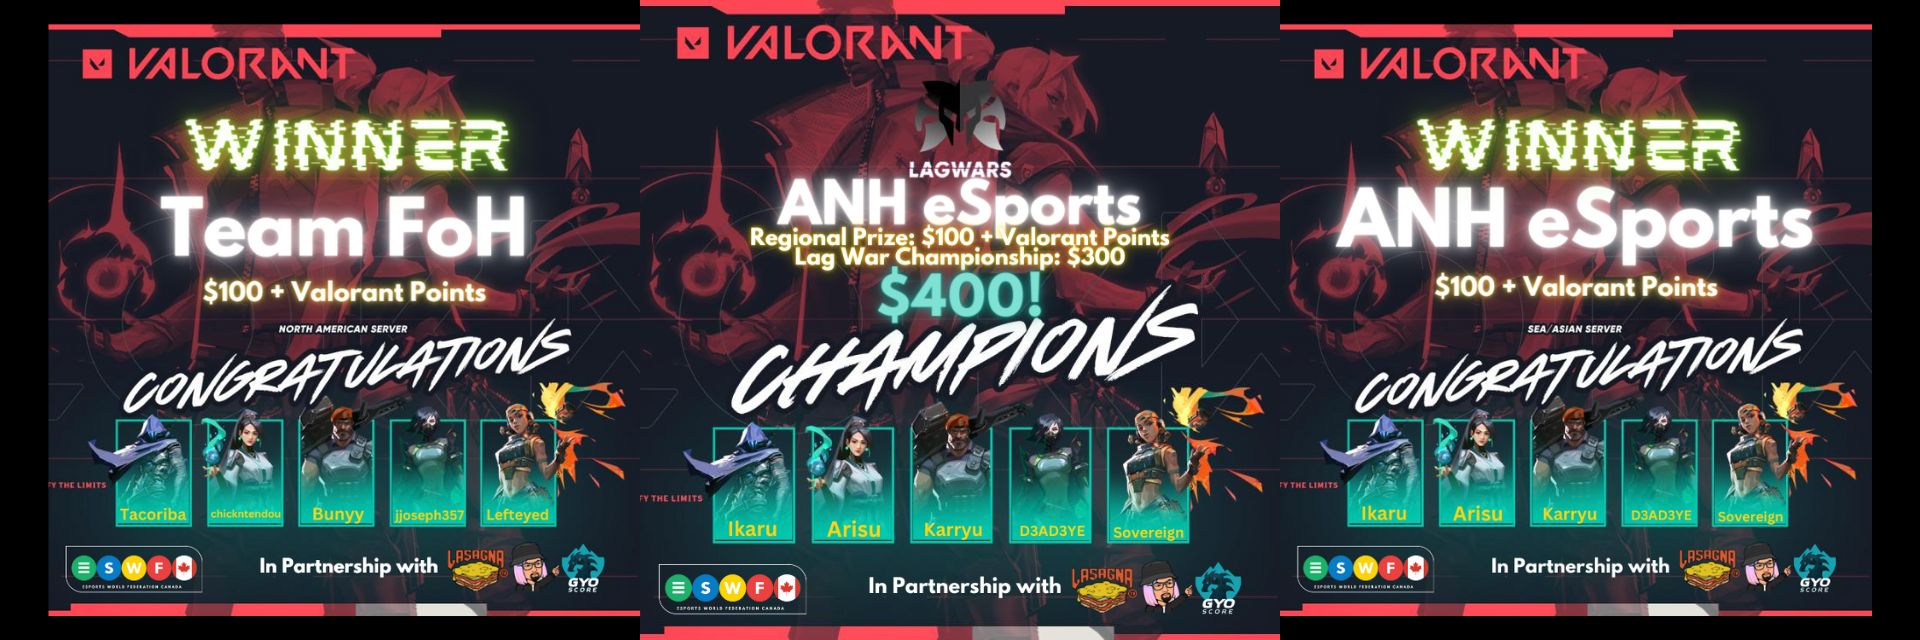 On the left side, Team FoH won the semi-finals in North American Server. On the opposite side, ANH eSports won the semi-finals in the Asian server. In the middle is the champion of LAG WAR, winning a total of $400 plus Valorant points